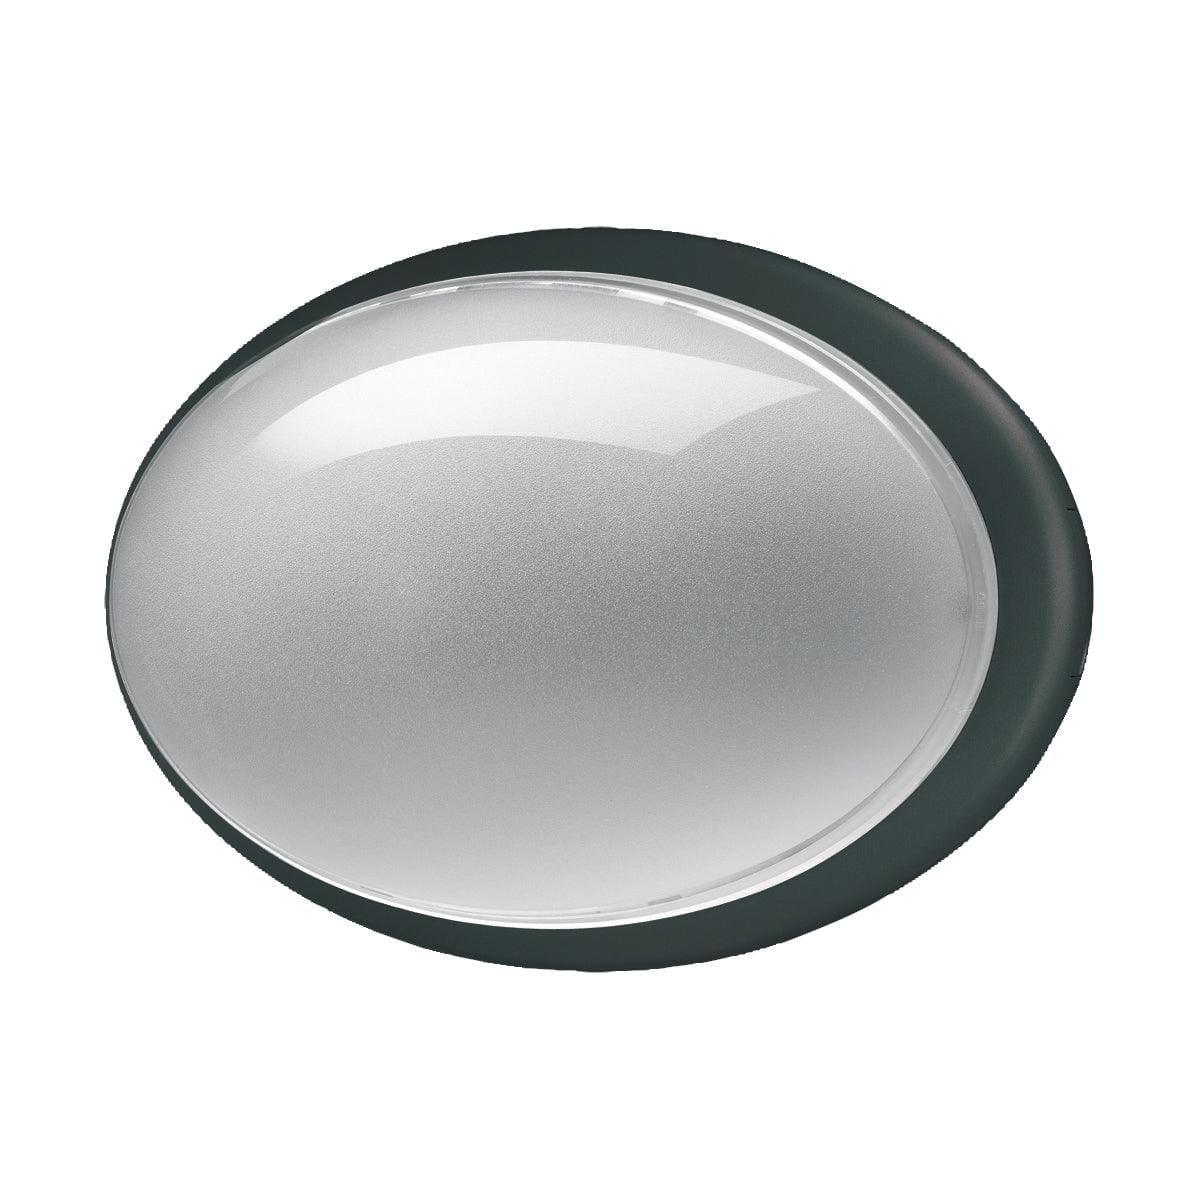 Eurofase - Class Oval Wall Sconce - 23904-026 | Montreal Lighting & Hardware